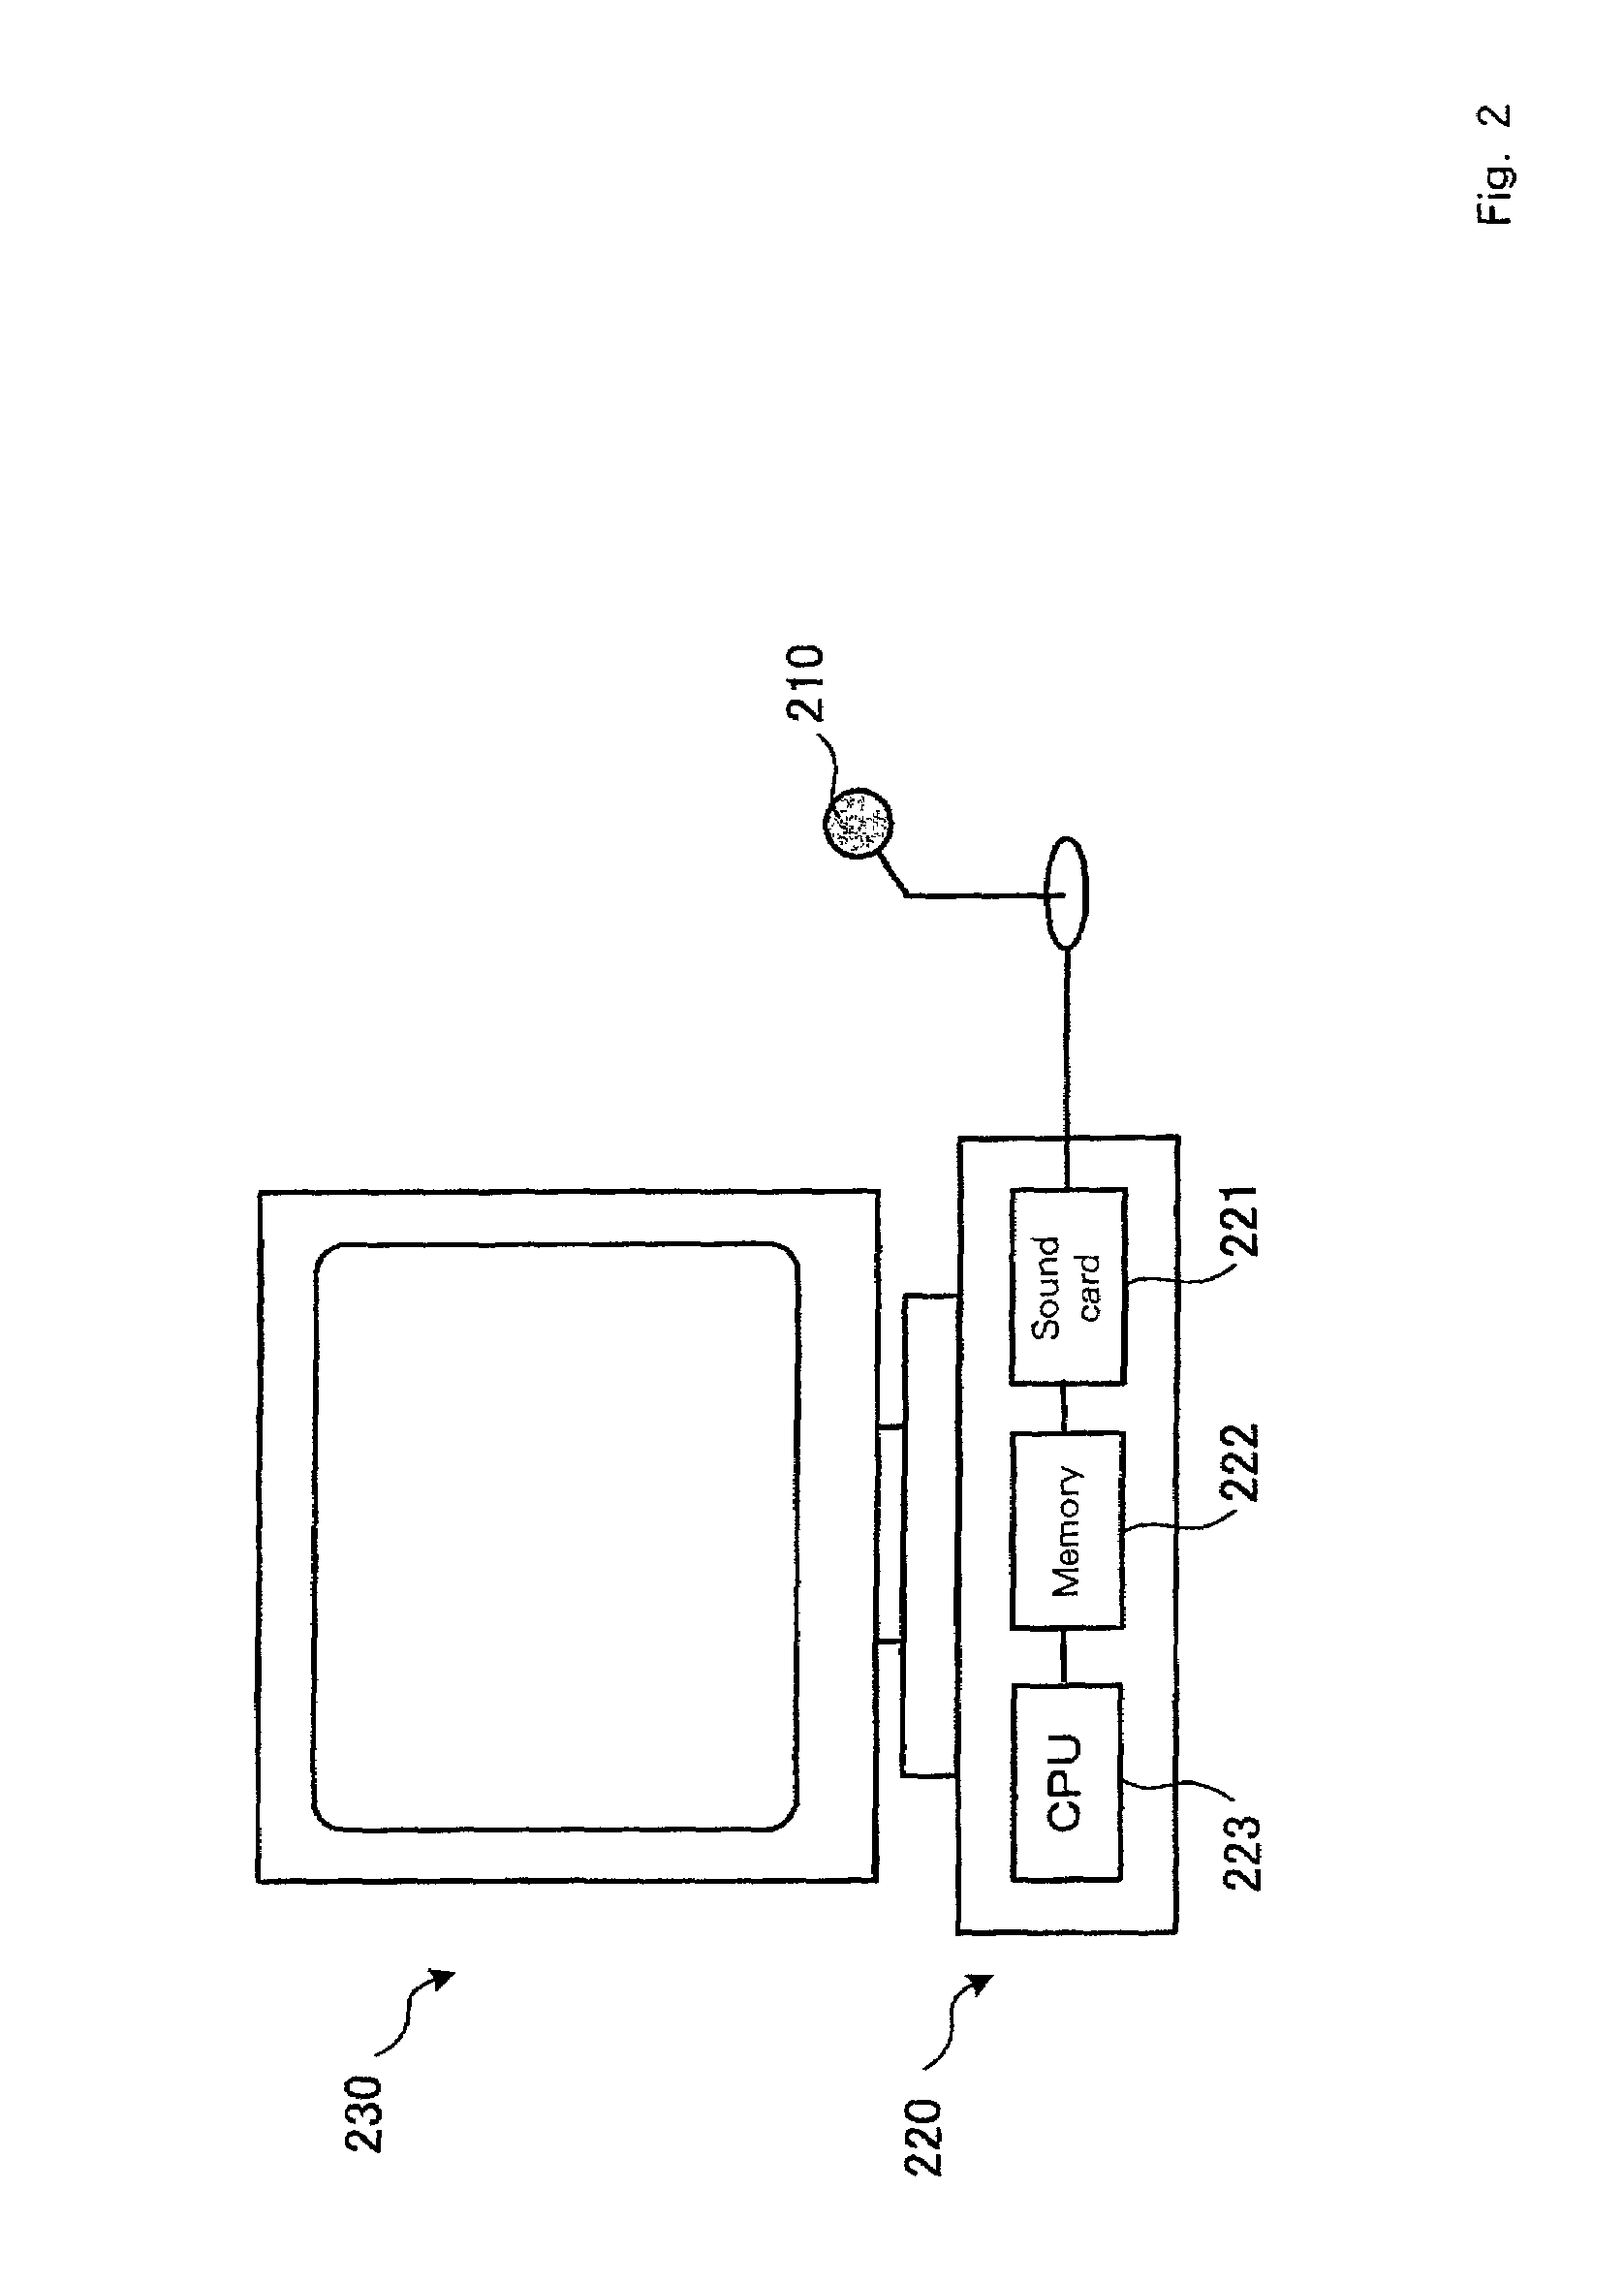 Systems and methods for natural spoken language word prediction and speech recognition